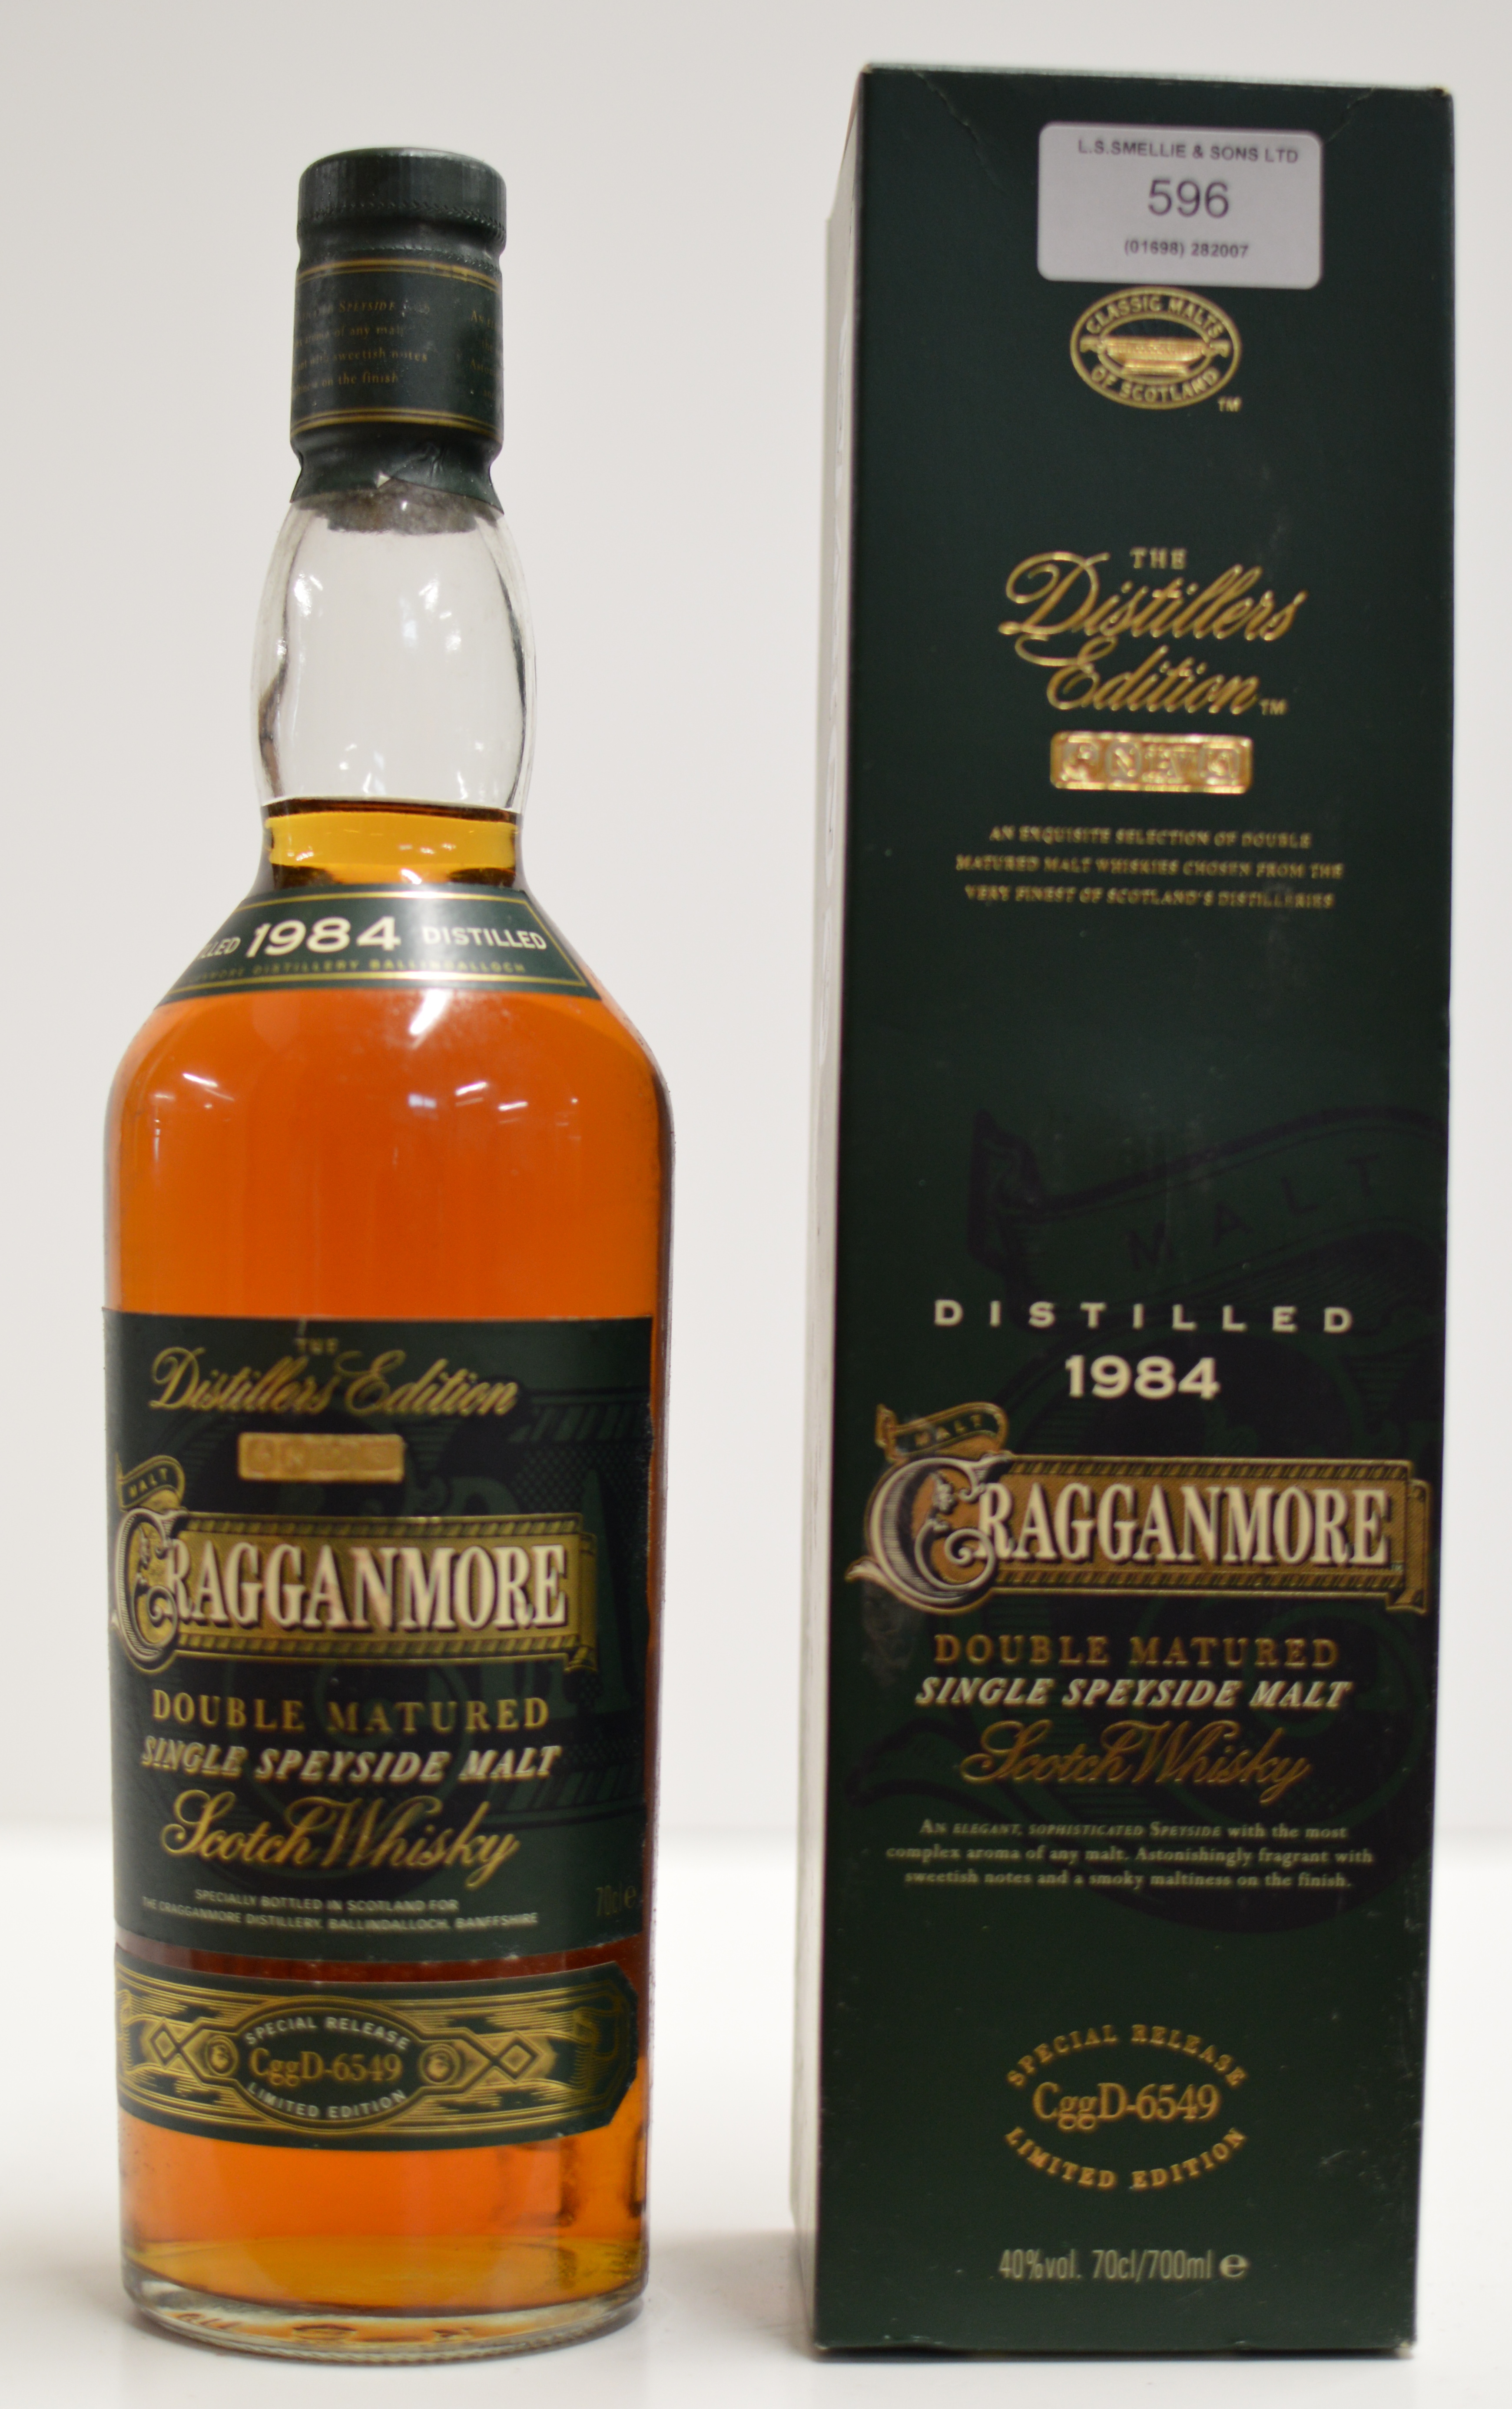 CRAGGANMORE 1984 DISTILLERS EDITION DOUBLE MATURED SPEYSIDE SINGLE MALT SCOTCH WHISKY, WITH